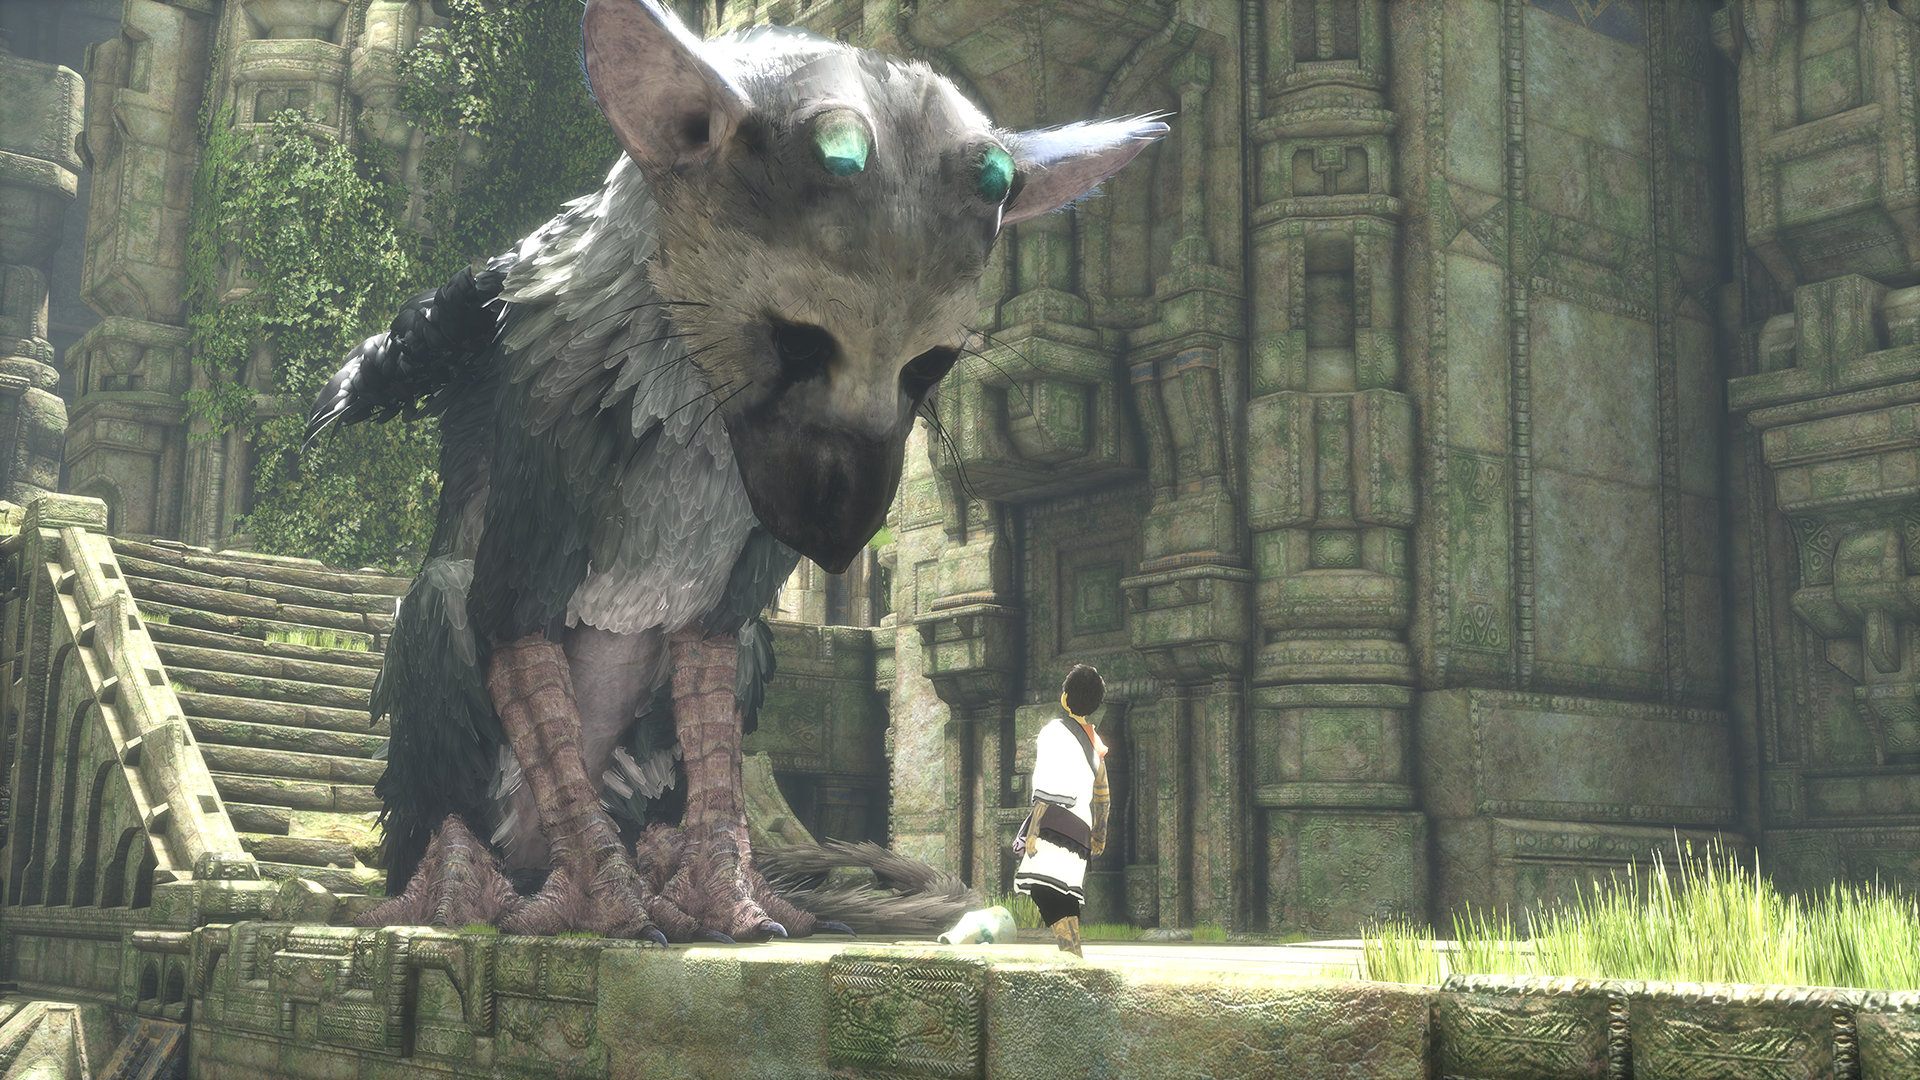 A boy and his bird dog in The Last Guardian